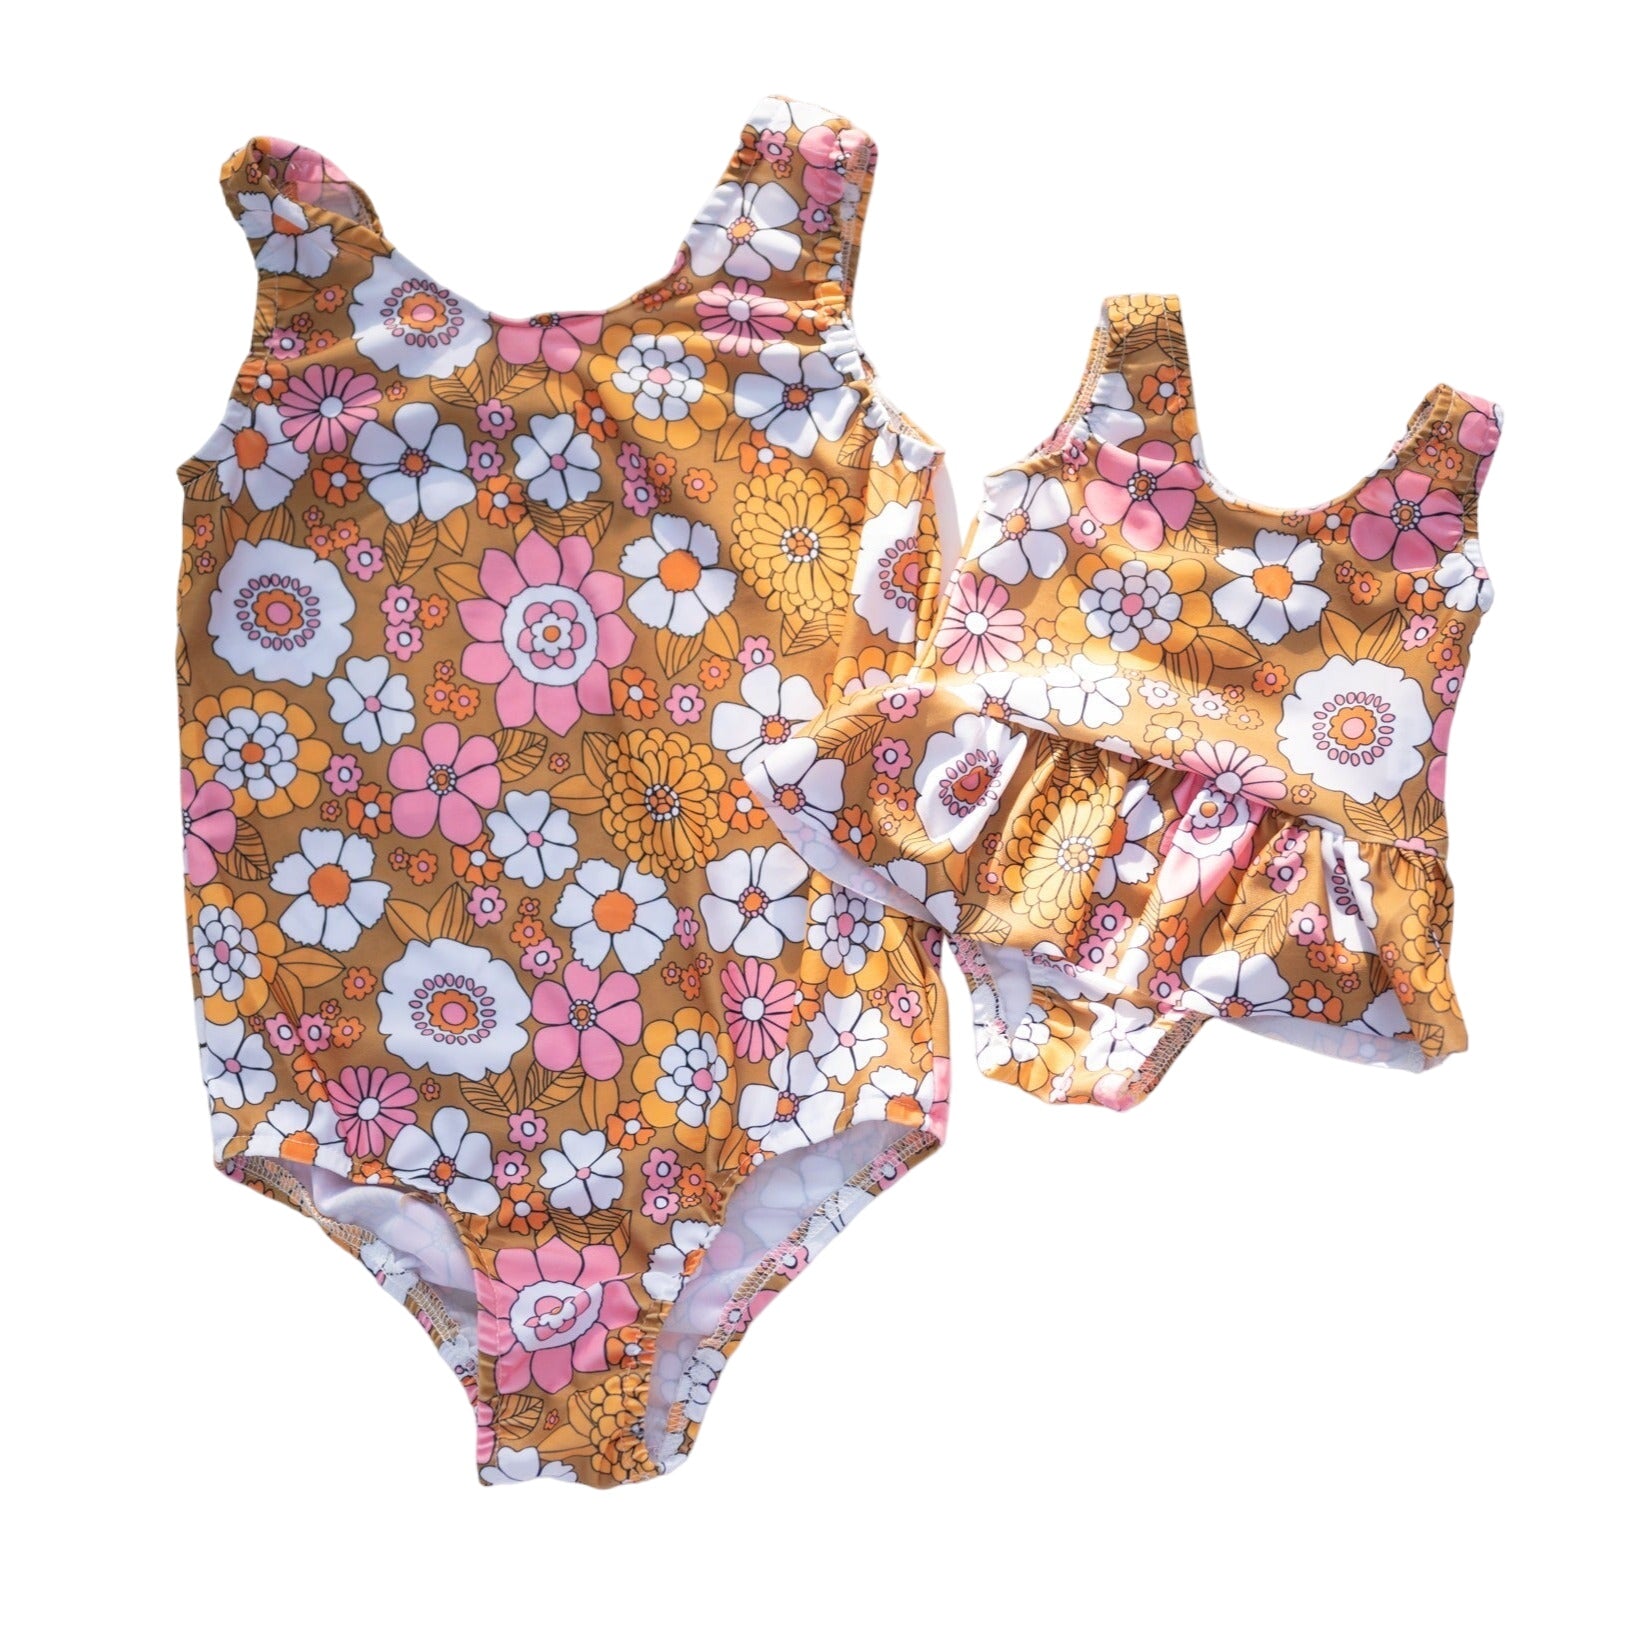 Boho Flower Power One Piece Swimsuit For Baby, Toddler And Girls